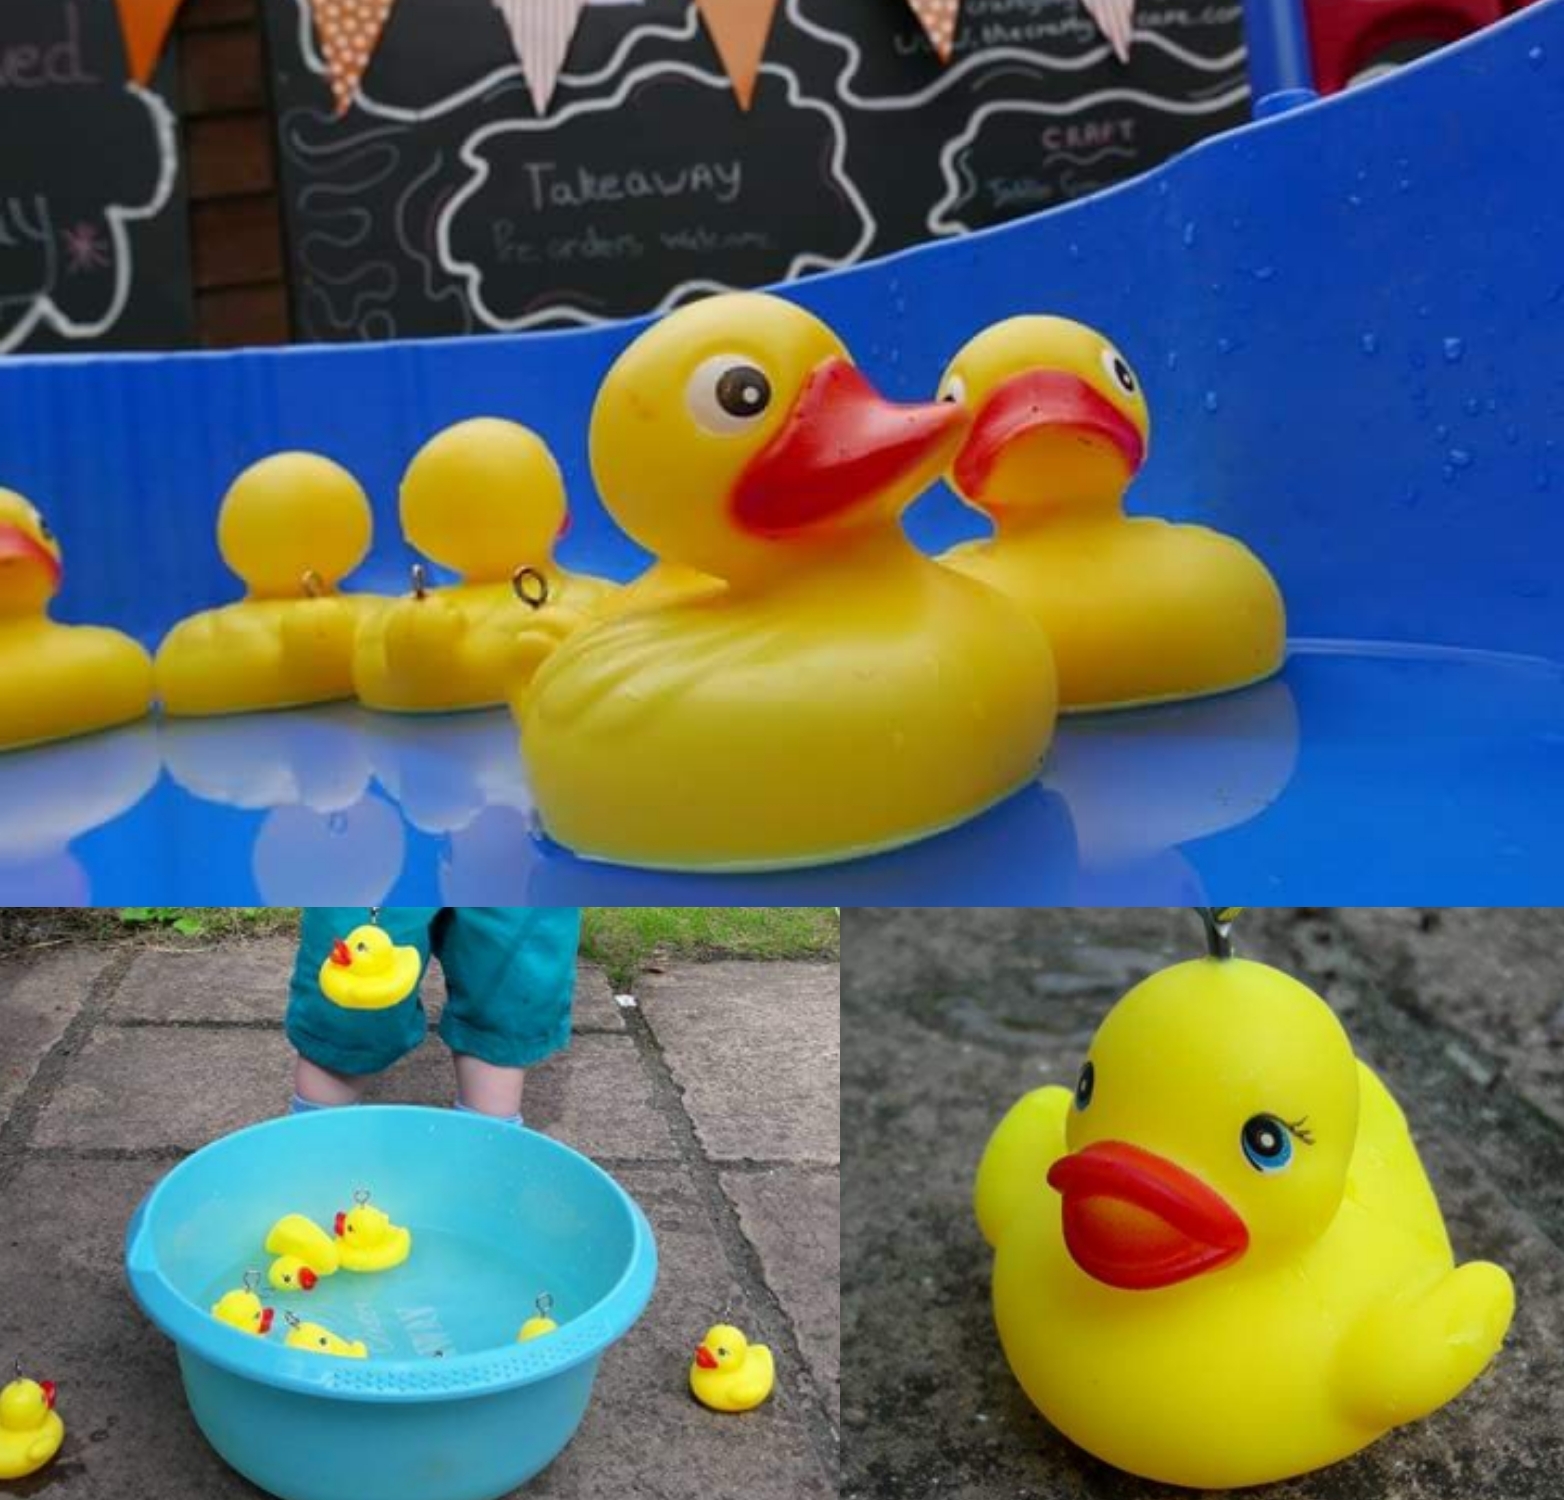 Magnetic Duck Fishing Game Contest - Fun Carnival Game for Kids